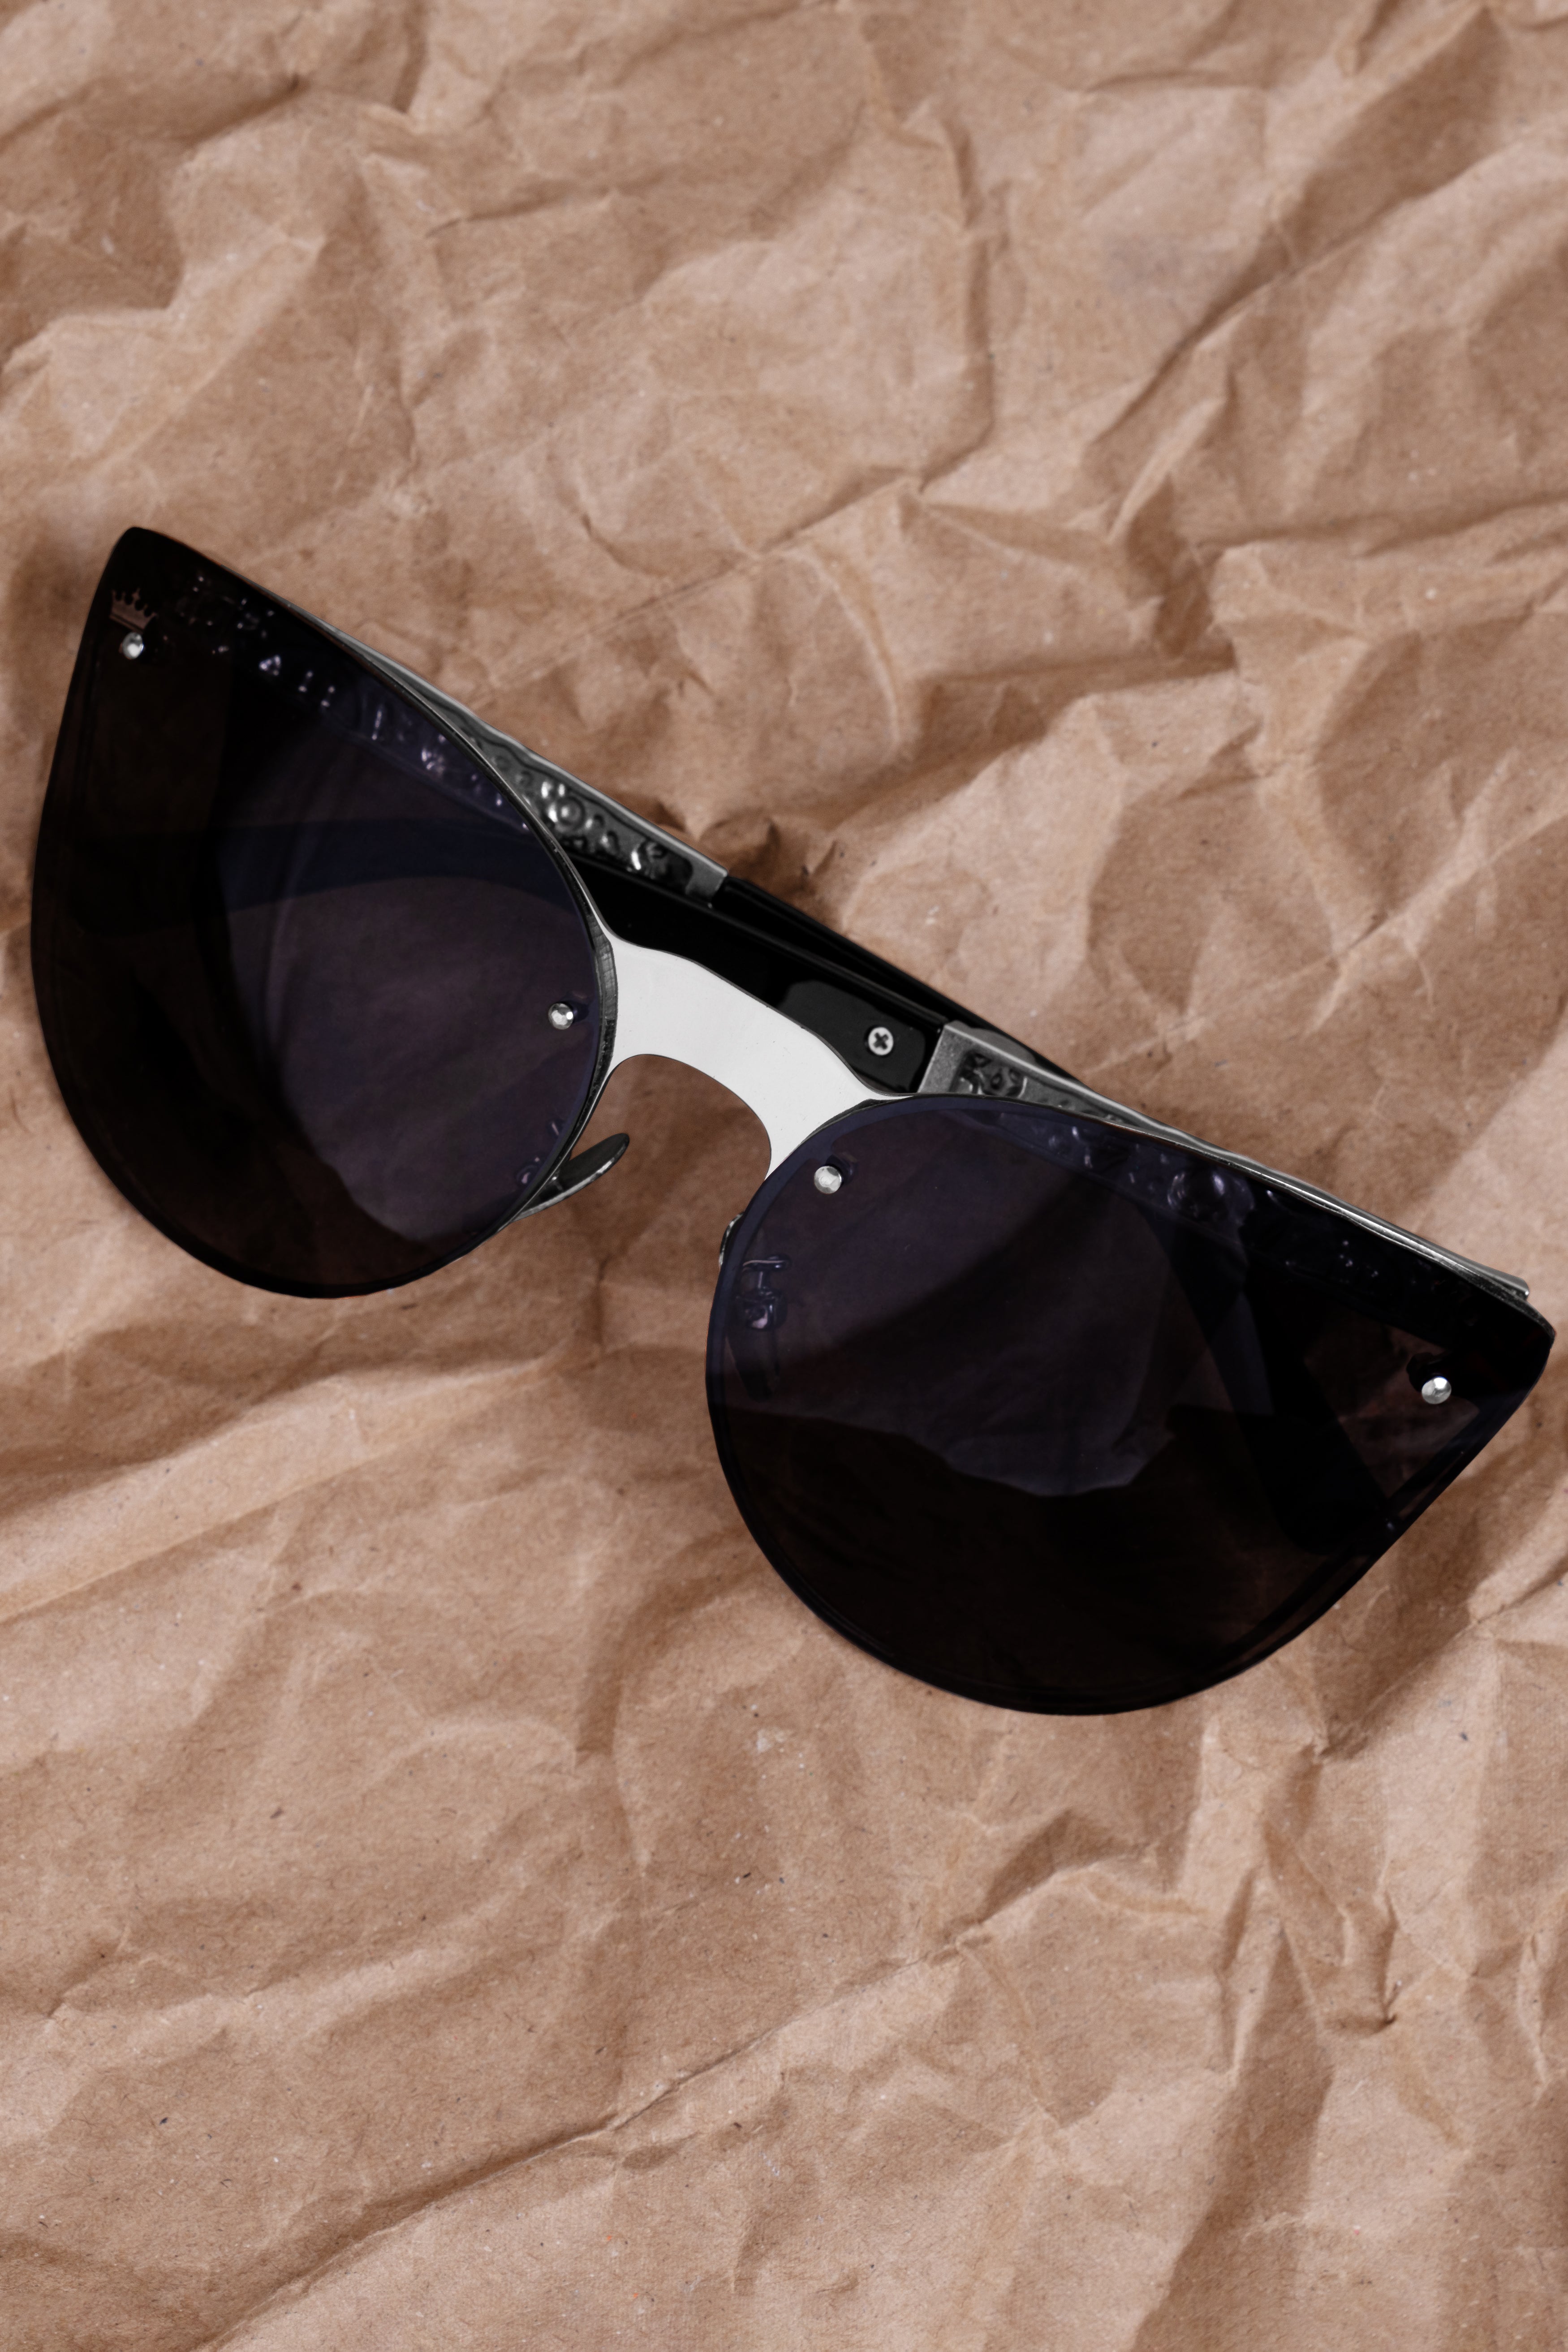 Pitch Black French Crown Cat Eye Unisex Sunglasses